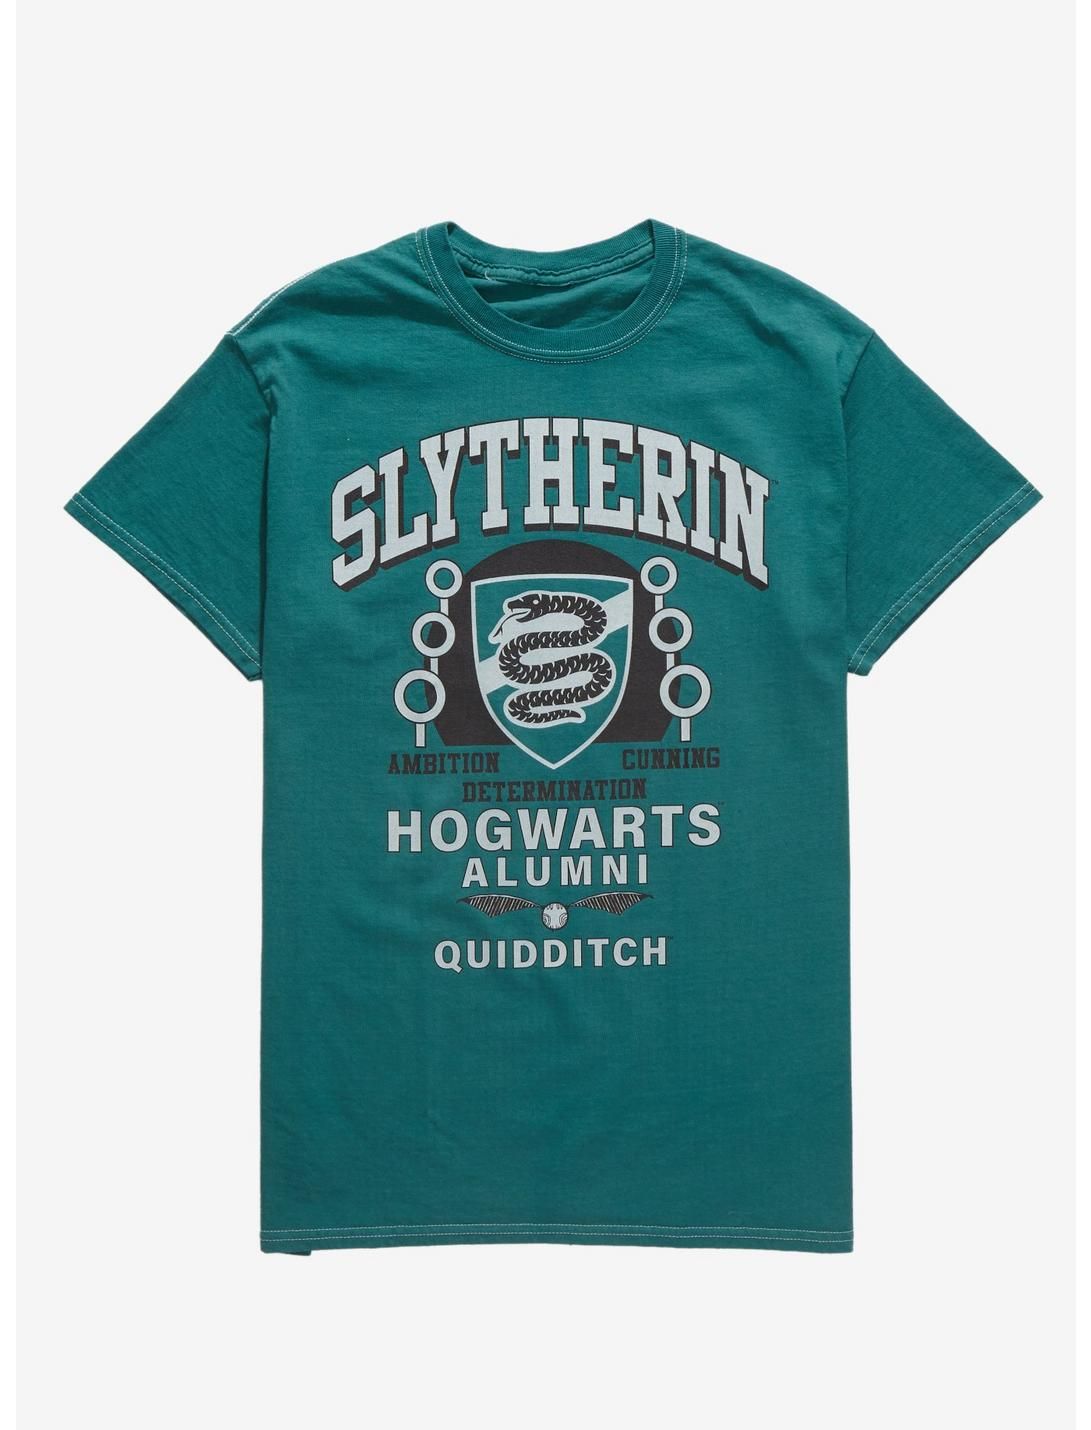 Harry Potter Slytherin Hogwarts Alumni T-Shirt - BoxLunch Exclusive | BoxLunch